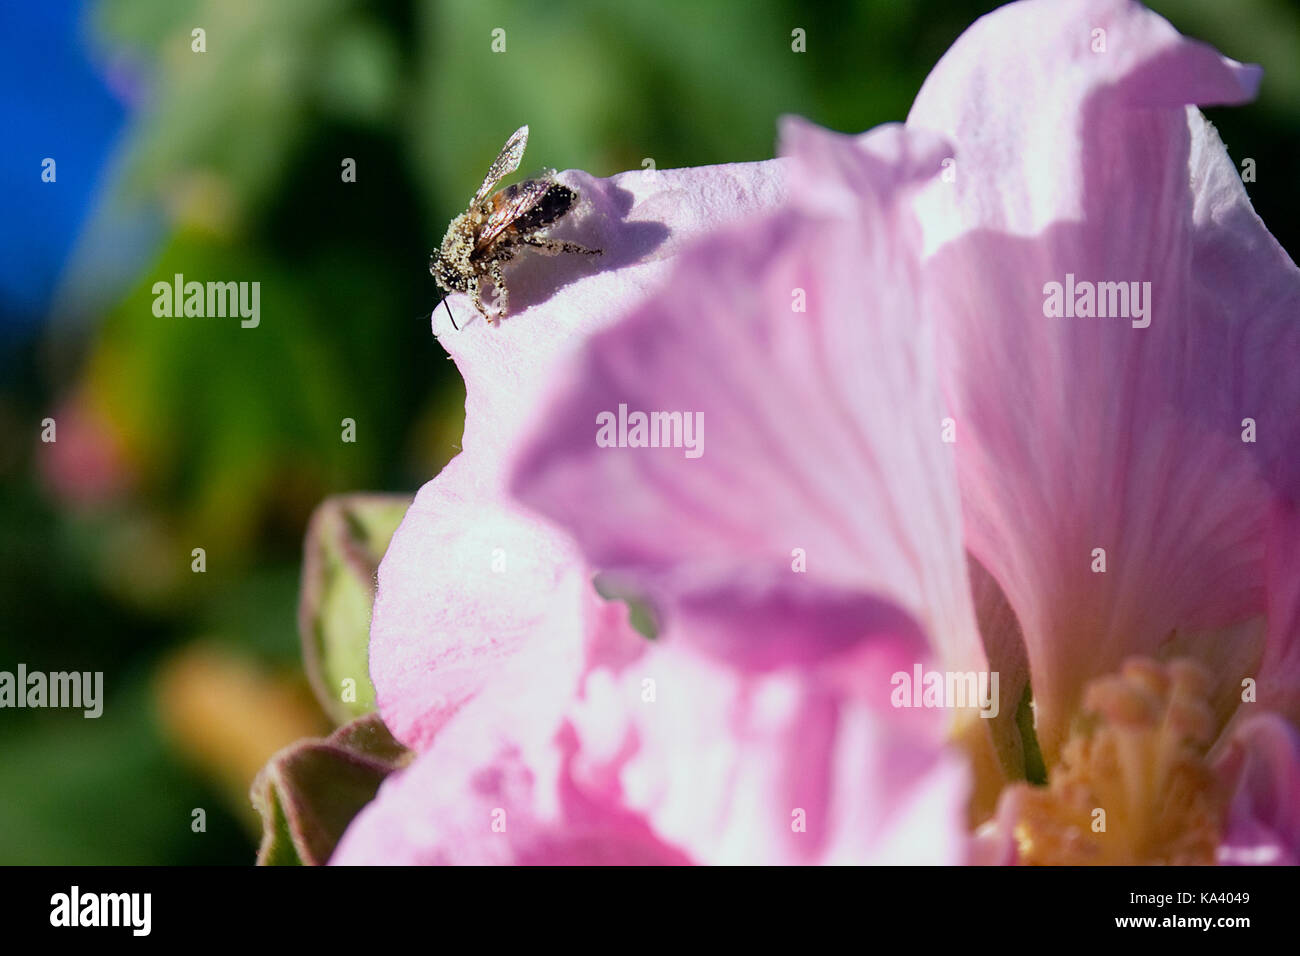 Bee Smothered with Pollen Resting on Rosa-Sinensis (Cayena) in Venezuela Stock Photo